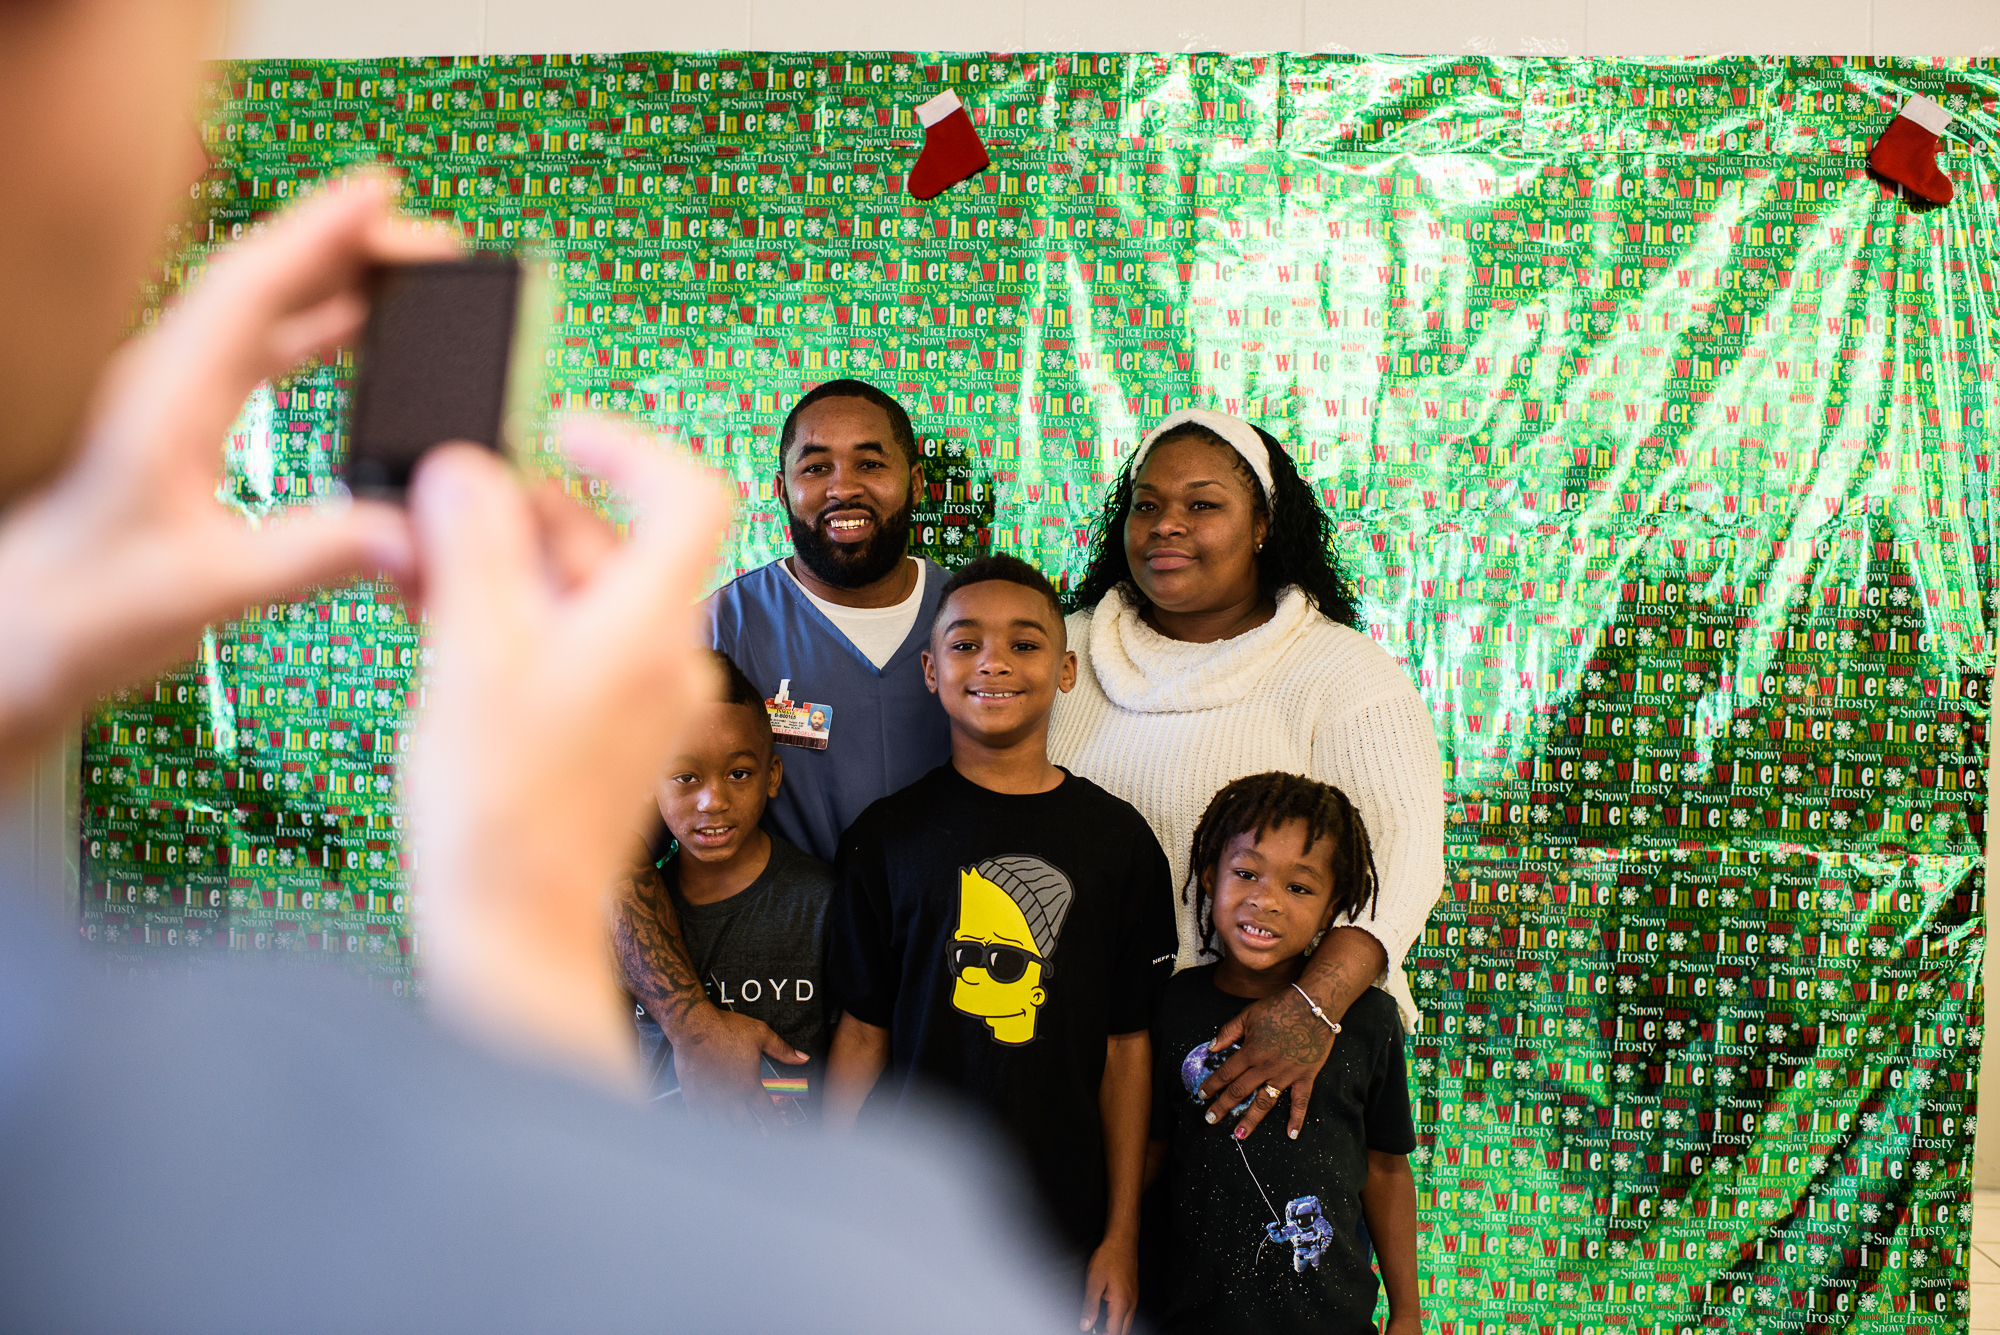  Rogelio and Sandrika stand with their sons, Rodarion, age 9, Rohandrick, age 6, and Romarion, age 4, for a Christmas picture at the Everglades Reentry Center in Miami, Florida. 